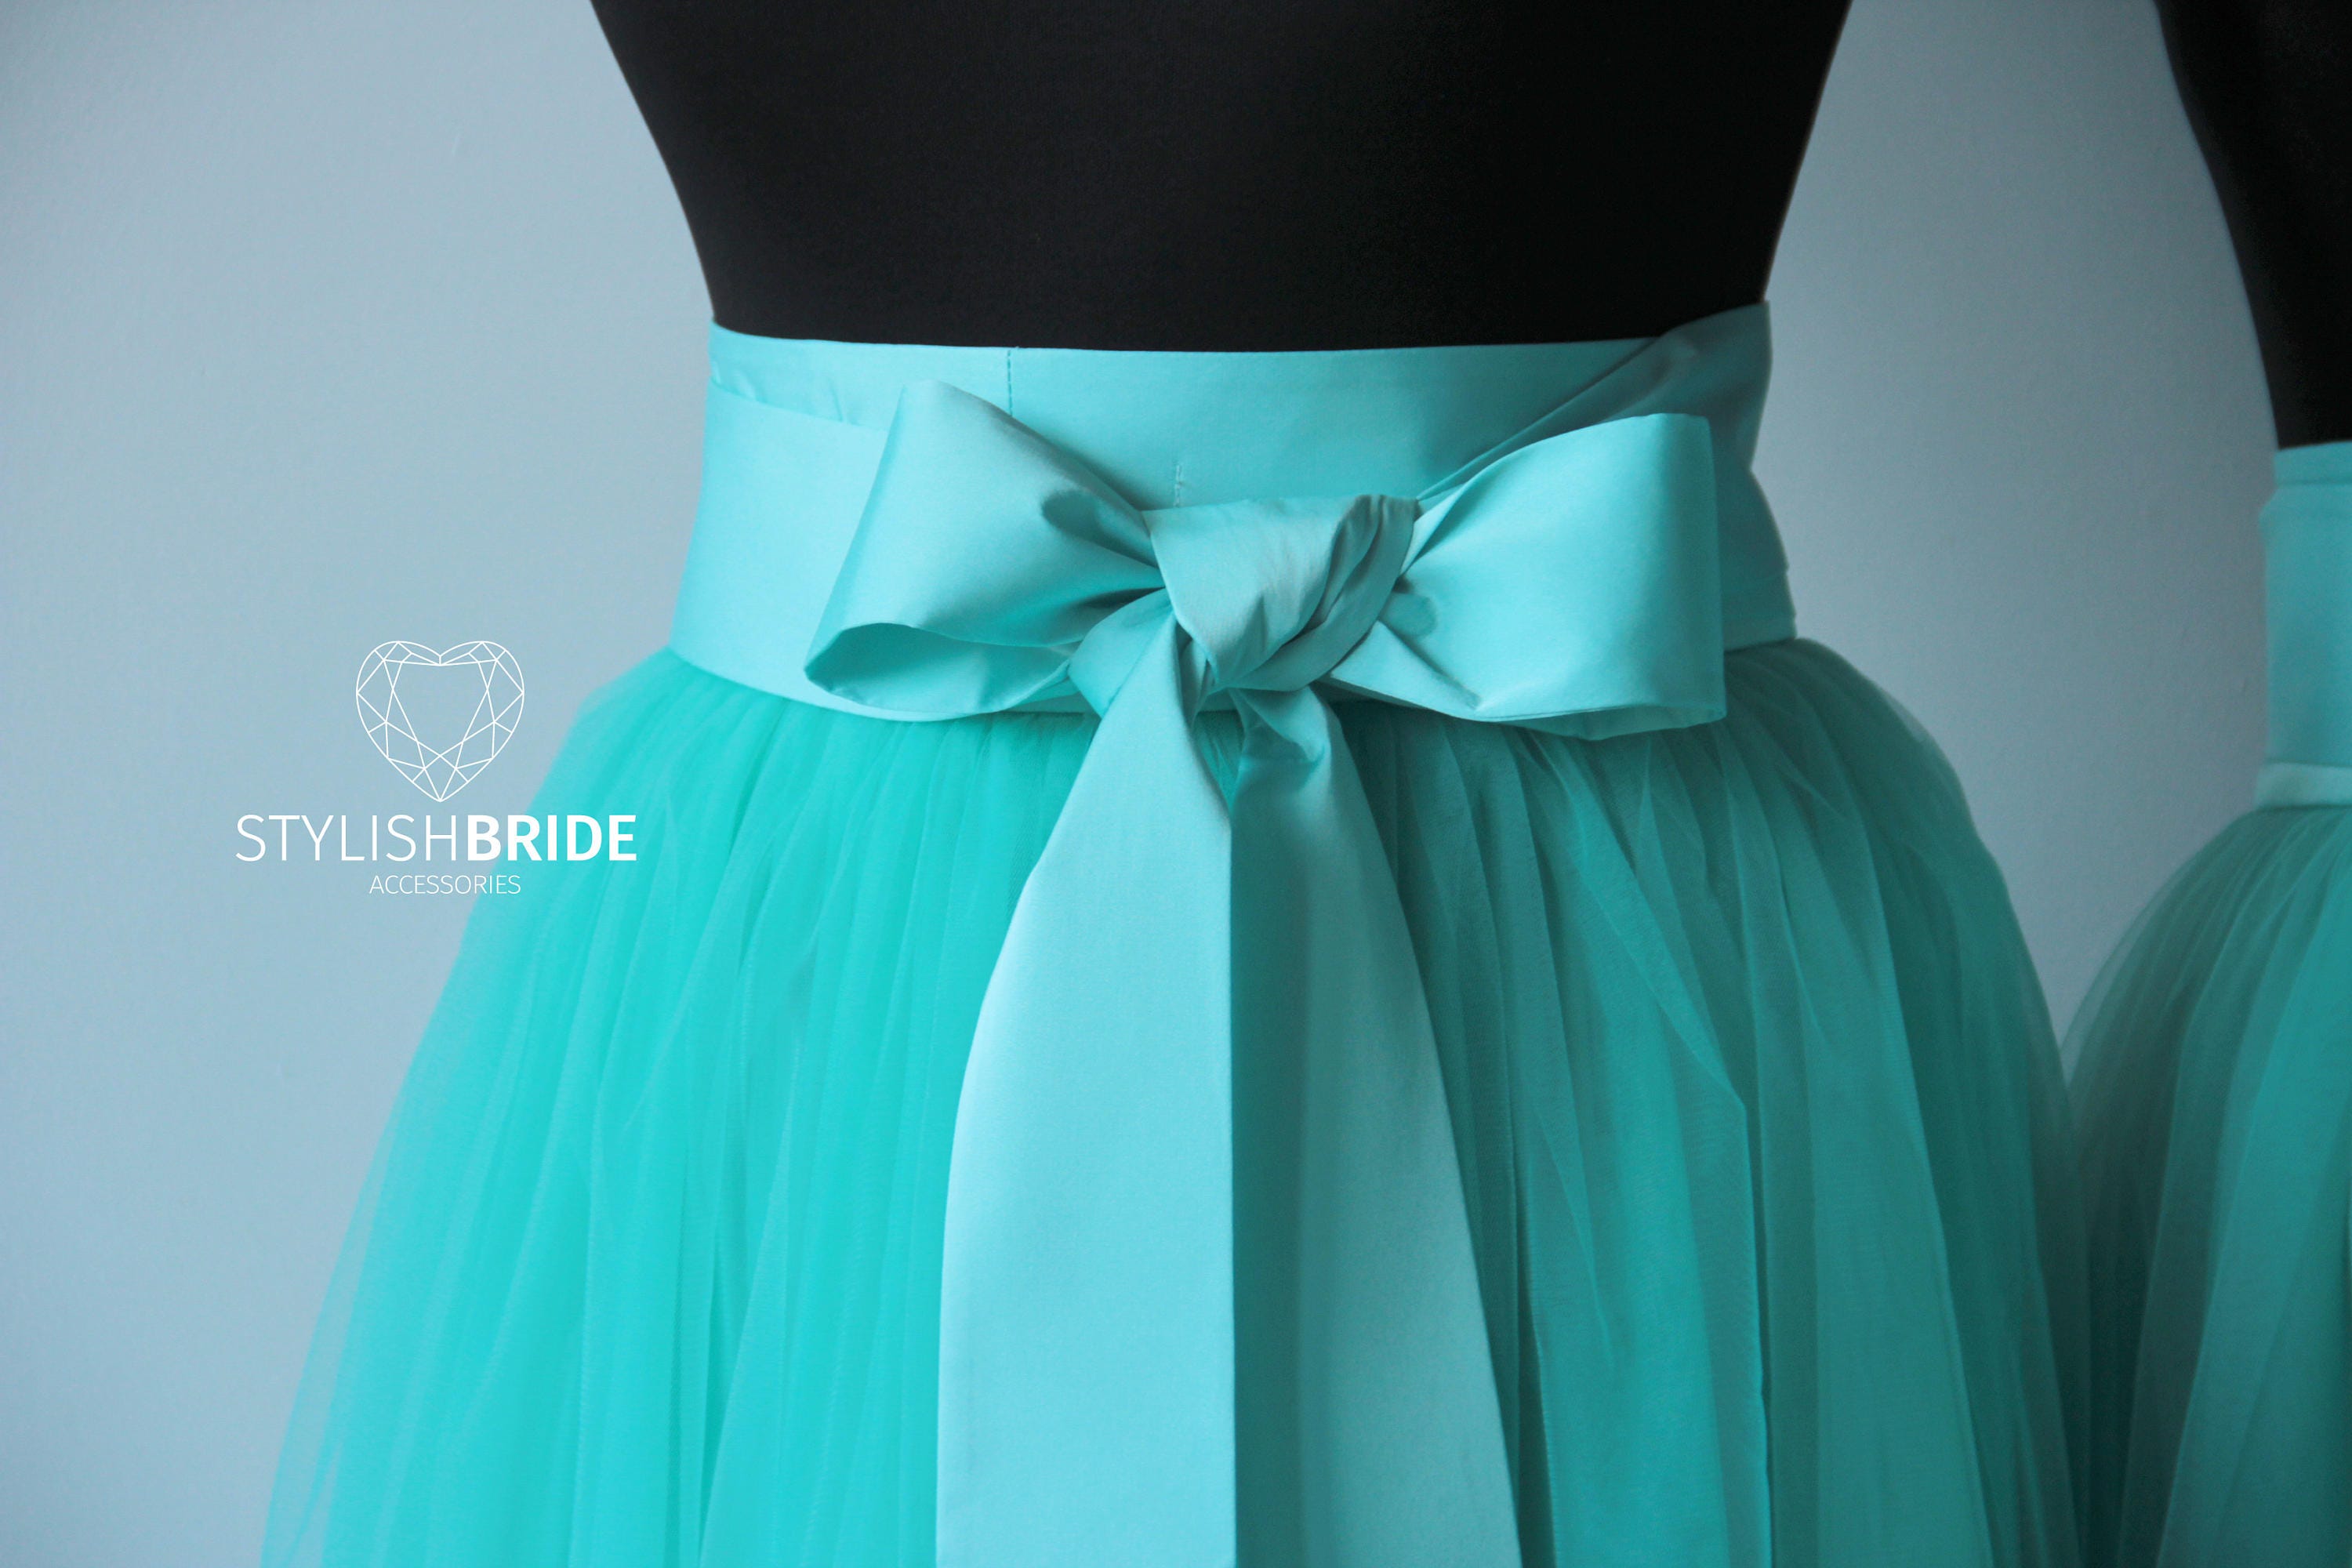 Details about   DOUBLE TULLE BOW SASH FITS ALL TYPES OF CHAIRS 25 COLORS 